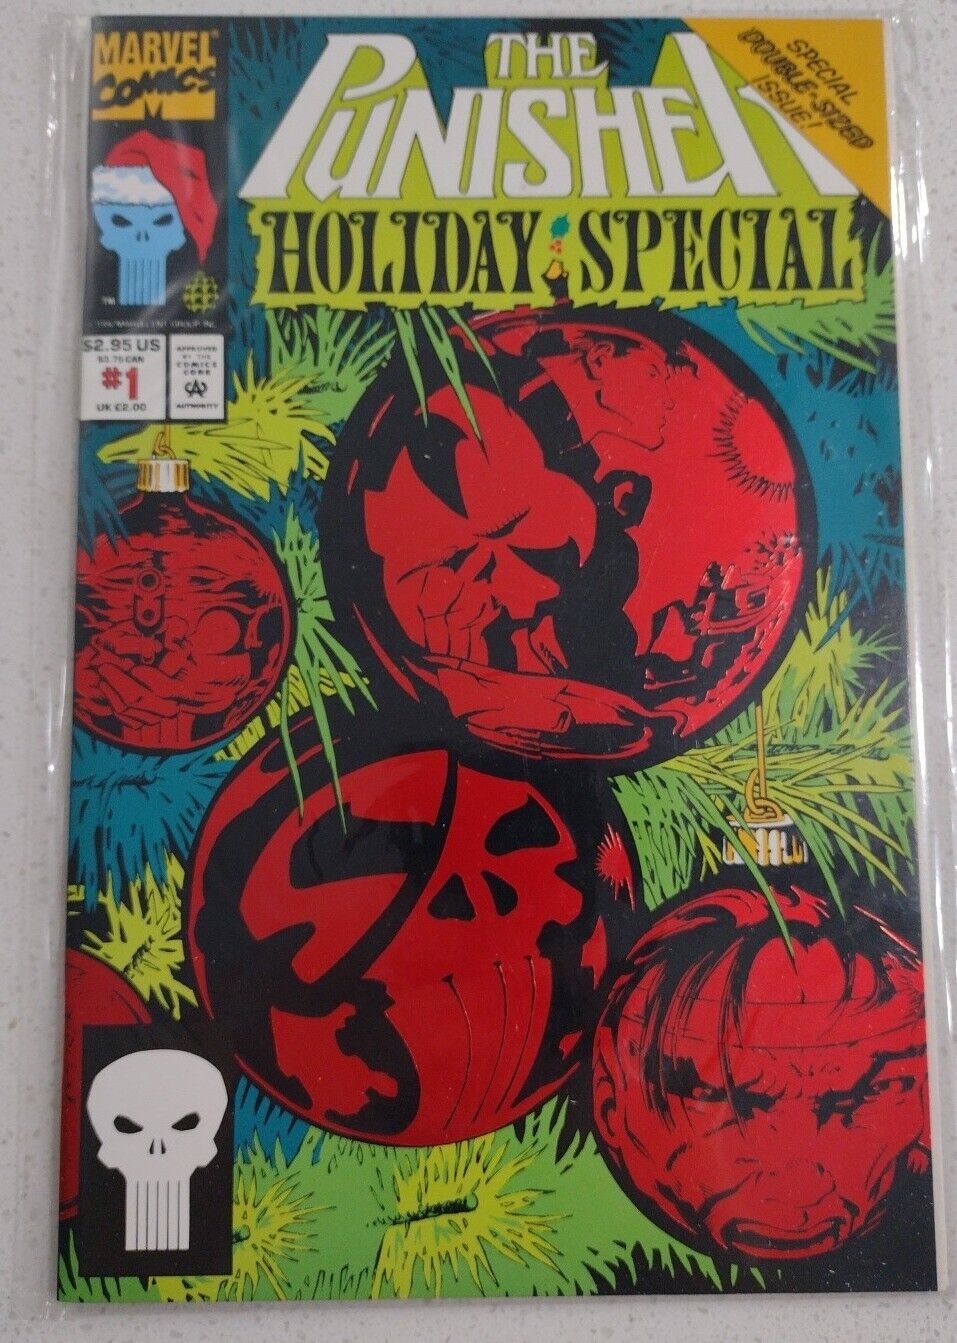 The Punisher Holiday Special #1 Comic 1st FIRST ISSUE 1993-95, Marvel Comics NEW